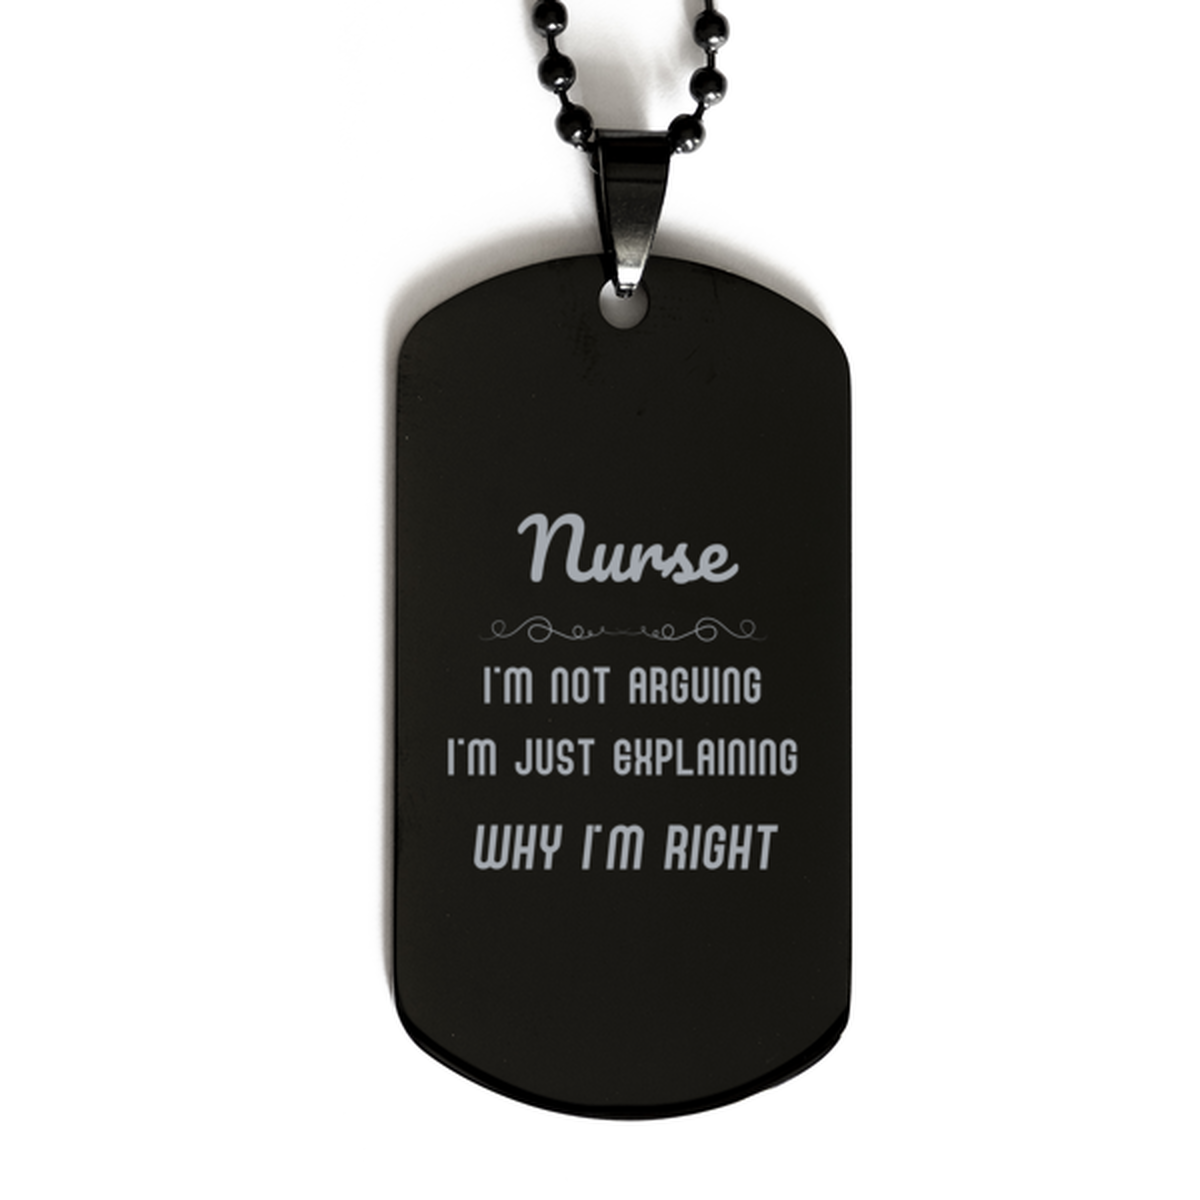 Nurse I'm not Arguing. I'm Just Explaining Why I'm RIGHT Black Dog Tag, Funny Saying Quote Nurse Gifts For Nurse Graduation Birthday Christmas Gifts for Men Women Coworker